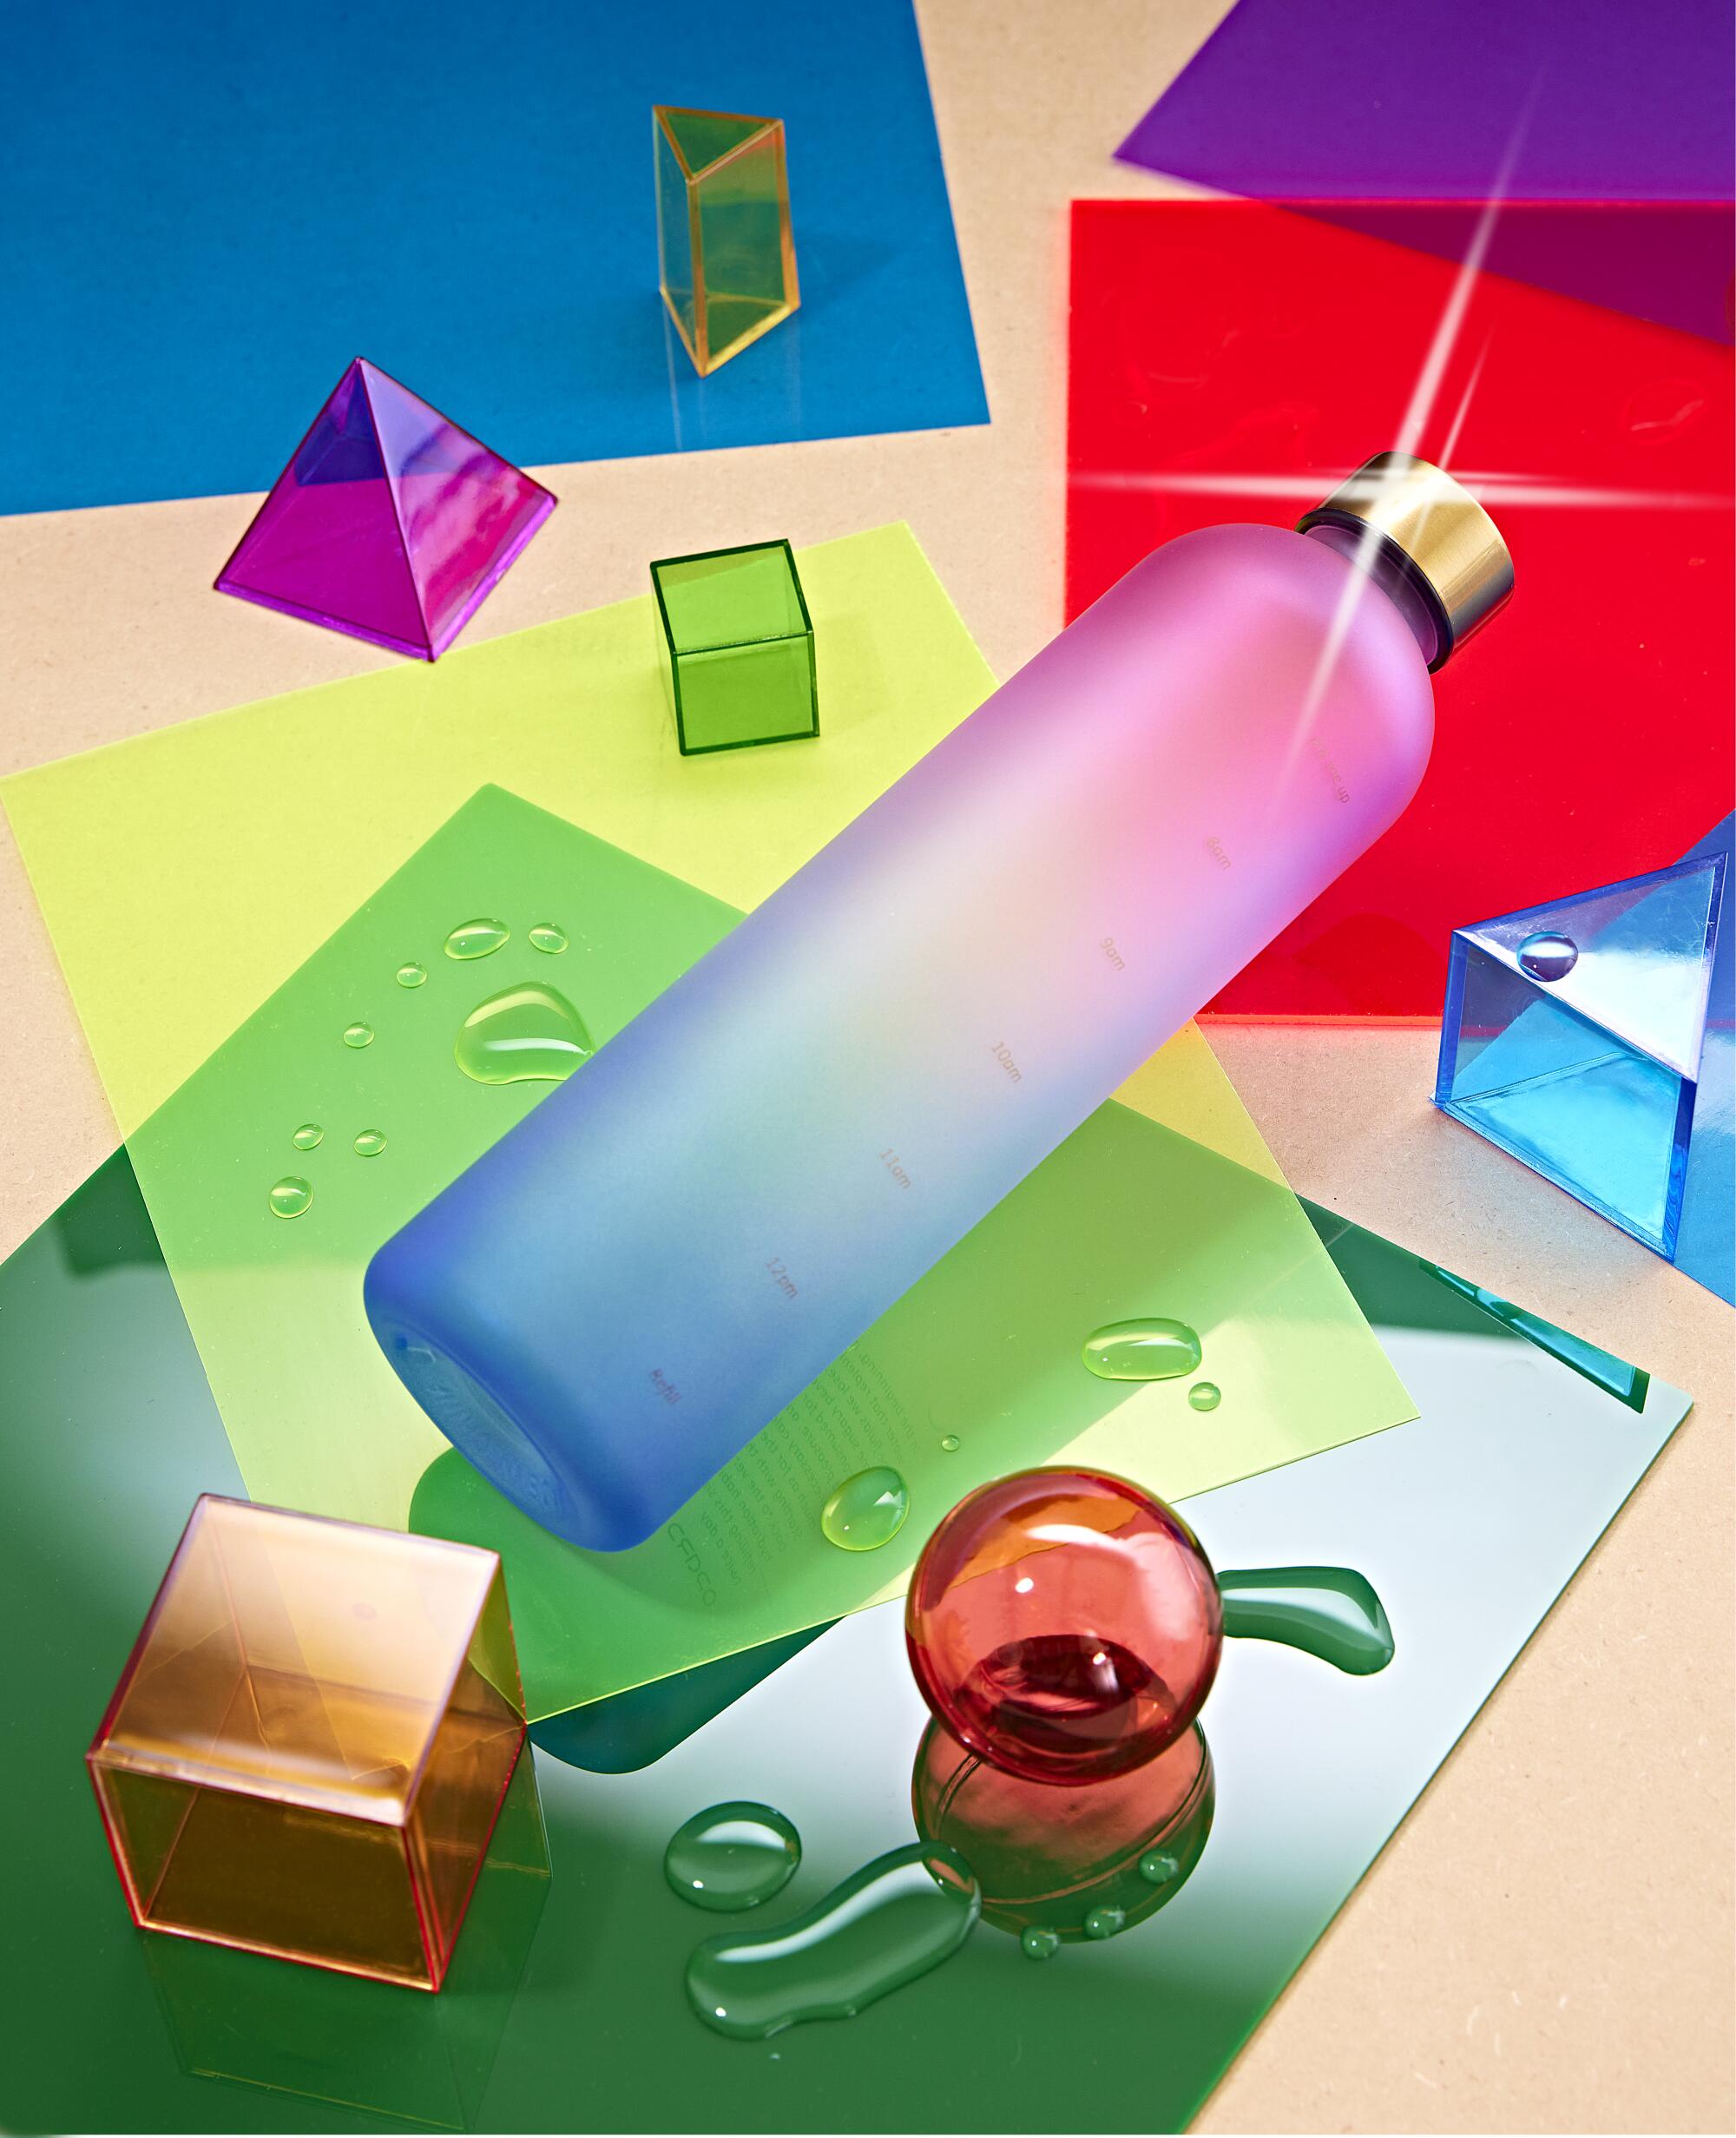 Still-life image of an eco-friendly water bottle surrounded by colorful paper and geometric objects.